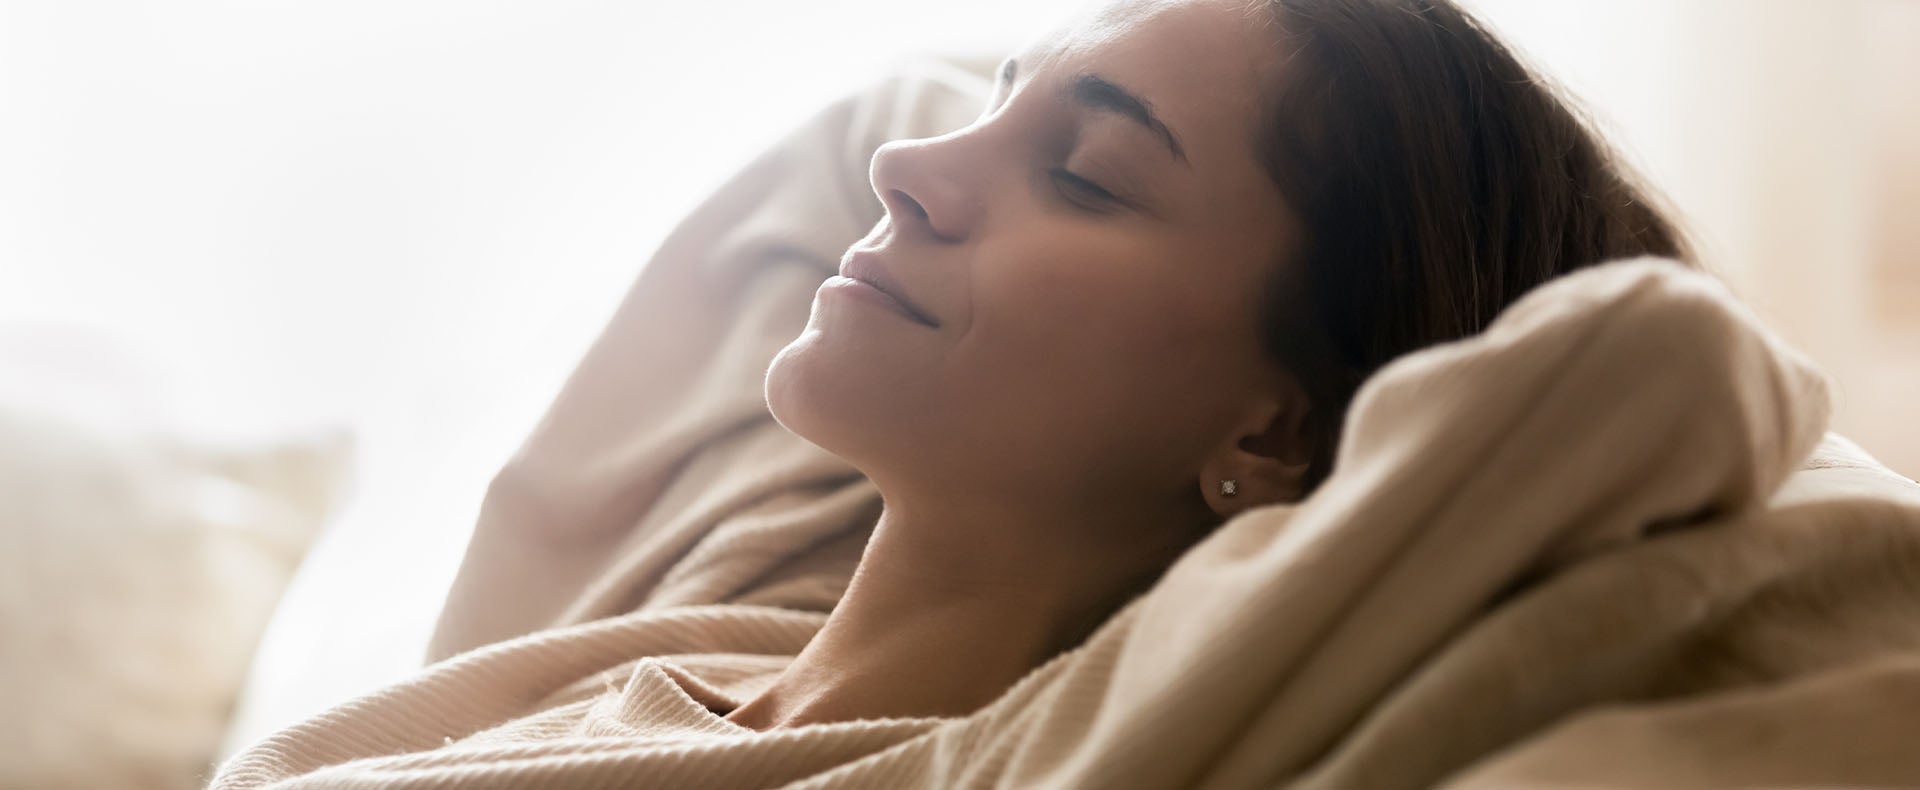 Woman happily relaxing with her eyes closed